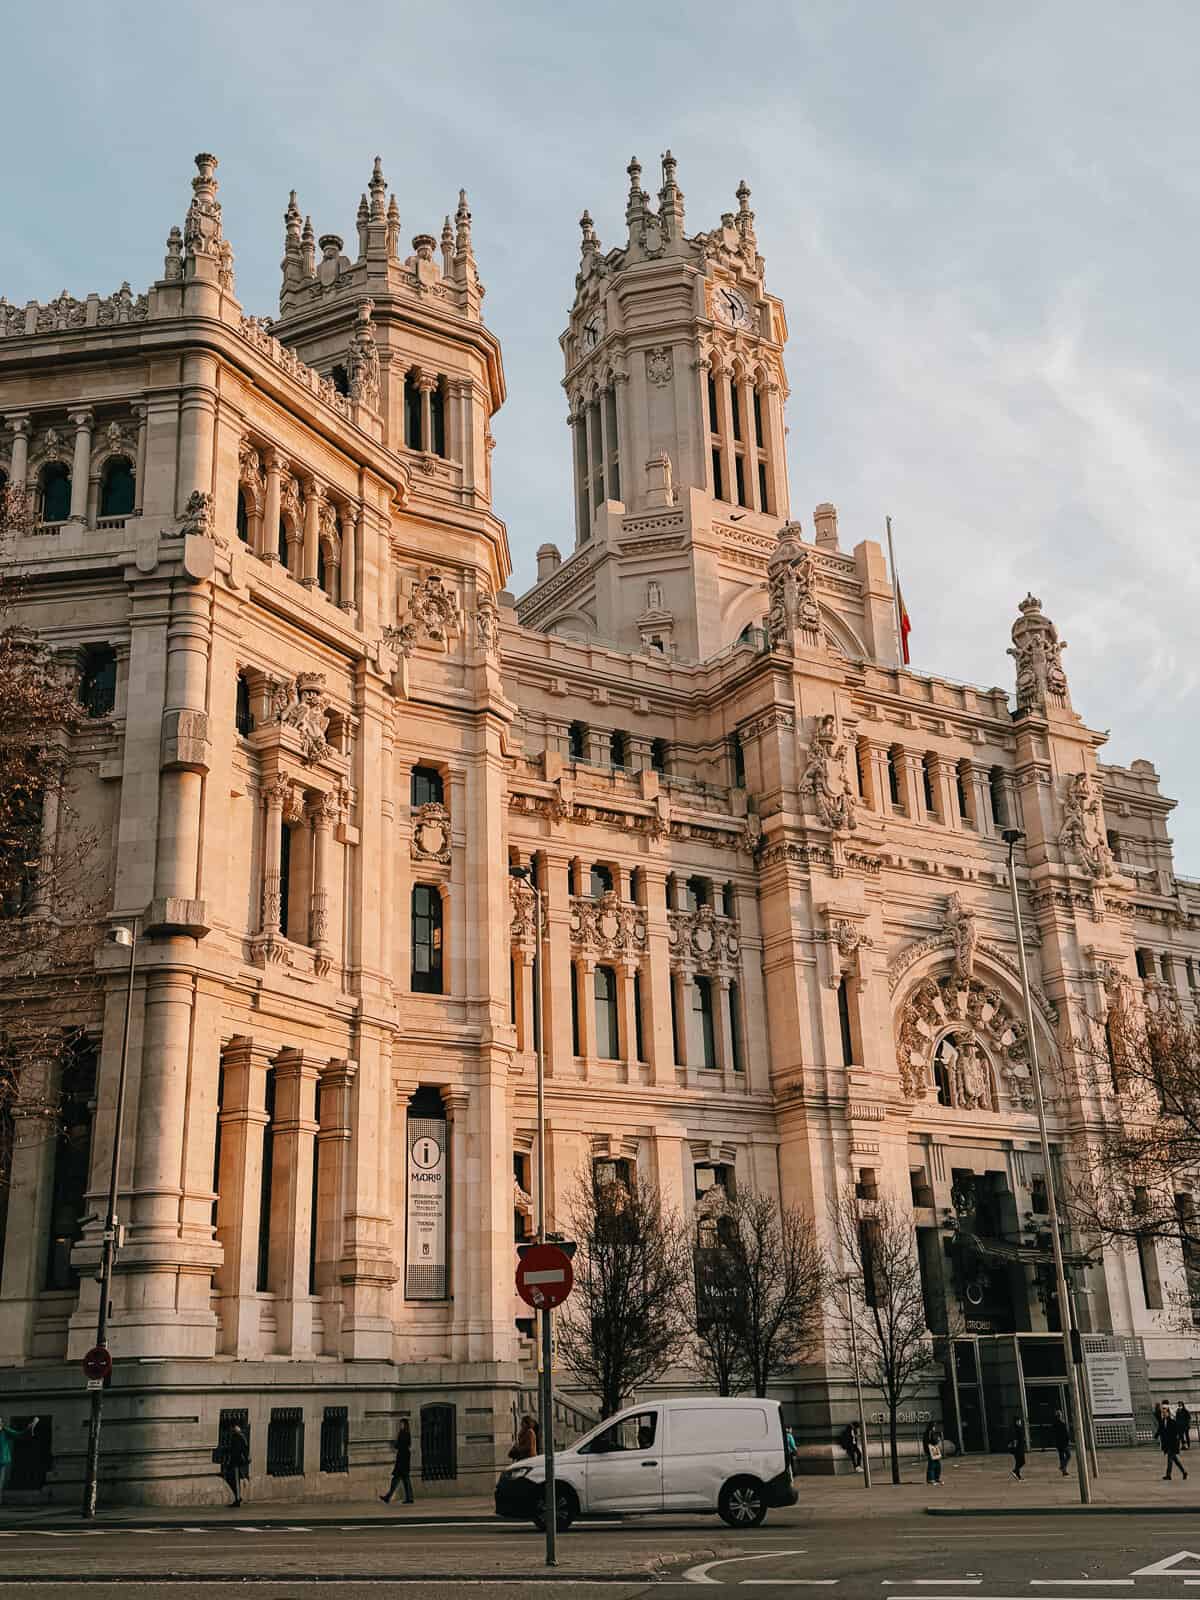 Cibeles Palace in Madrid, captured in soft evening light that casts a warm glow on the building's elaborate façade and detailed sculptures, with clear skies above and city life moving along its base.